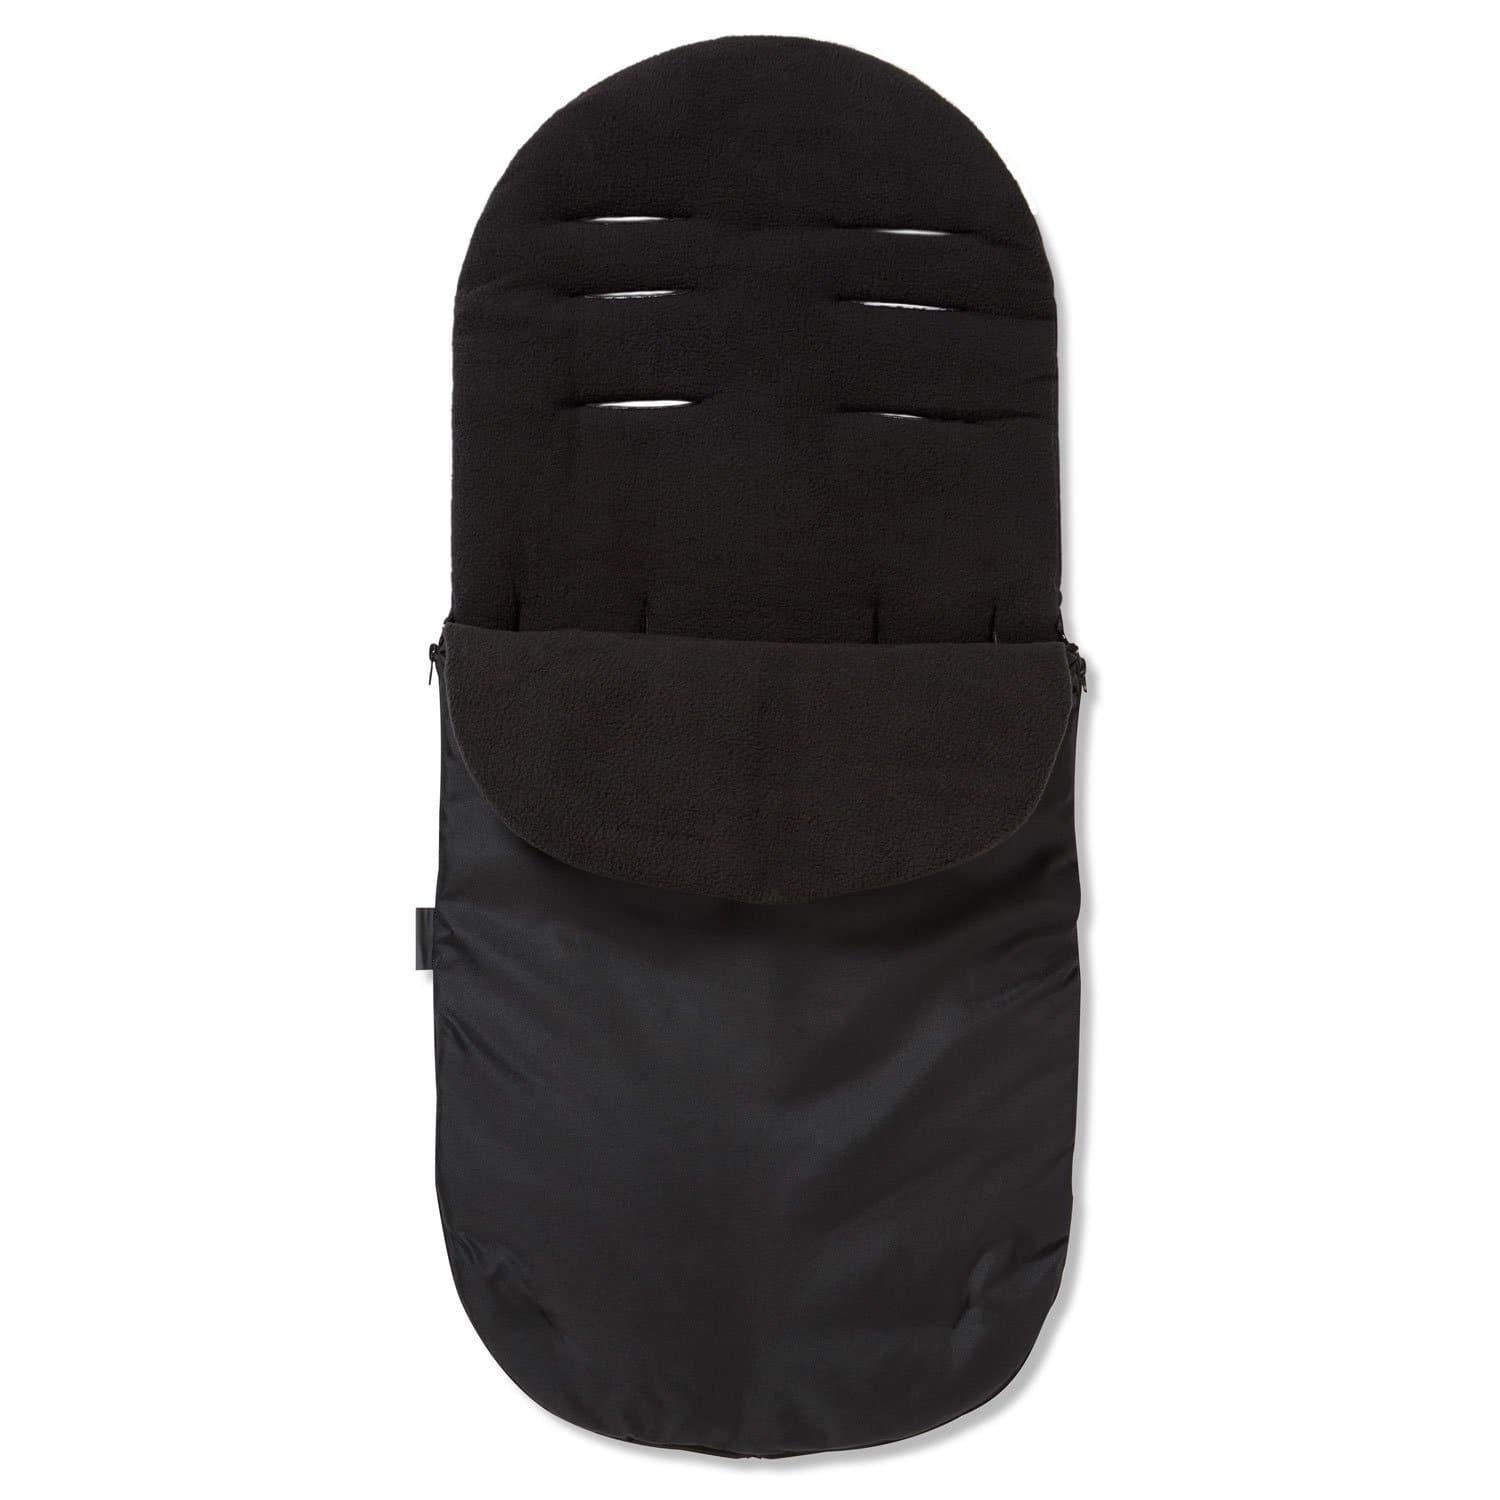 Footmuff / Cosy Toes Compatible with Combi - Black / Fits All Models | For Your Little One